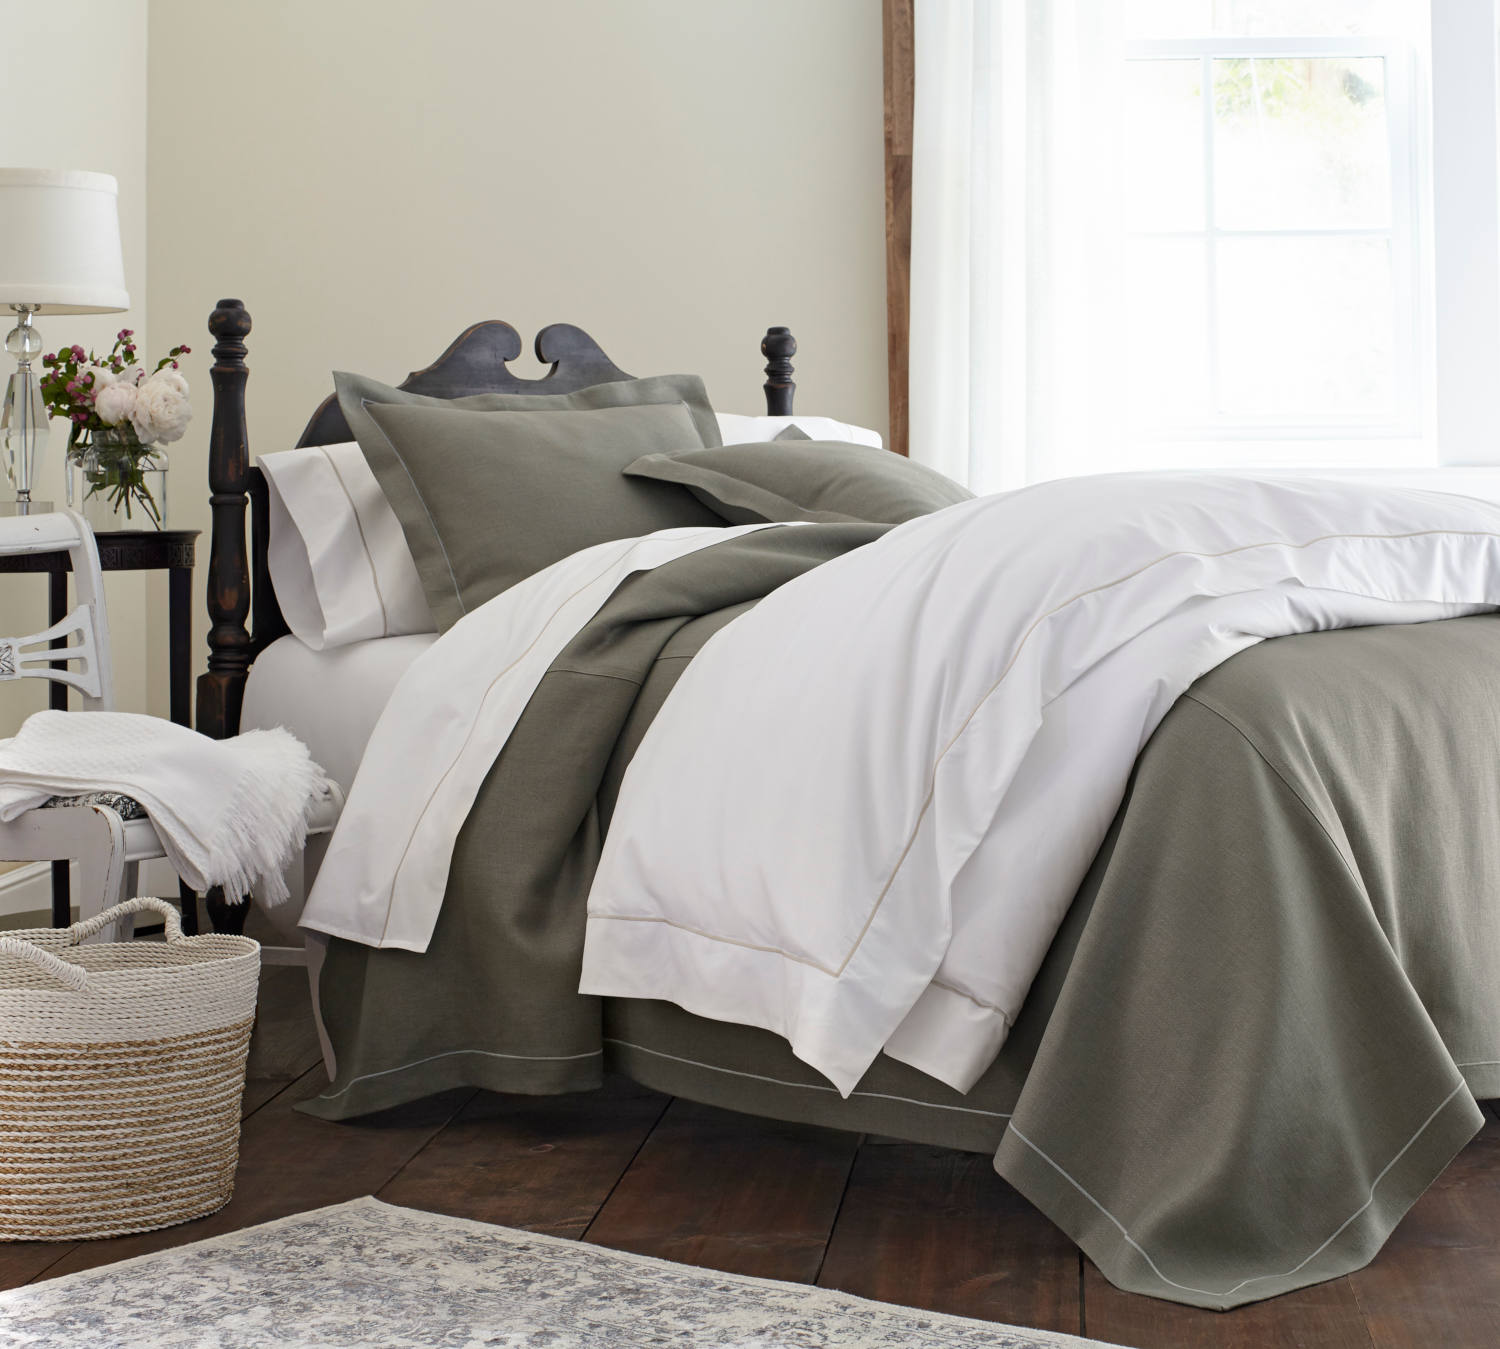 Peacock Alley Boutique Sheets Bedding View